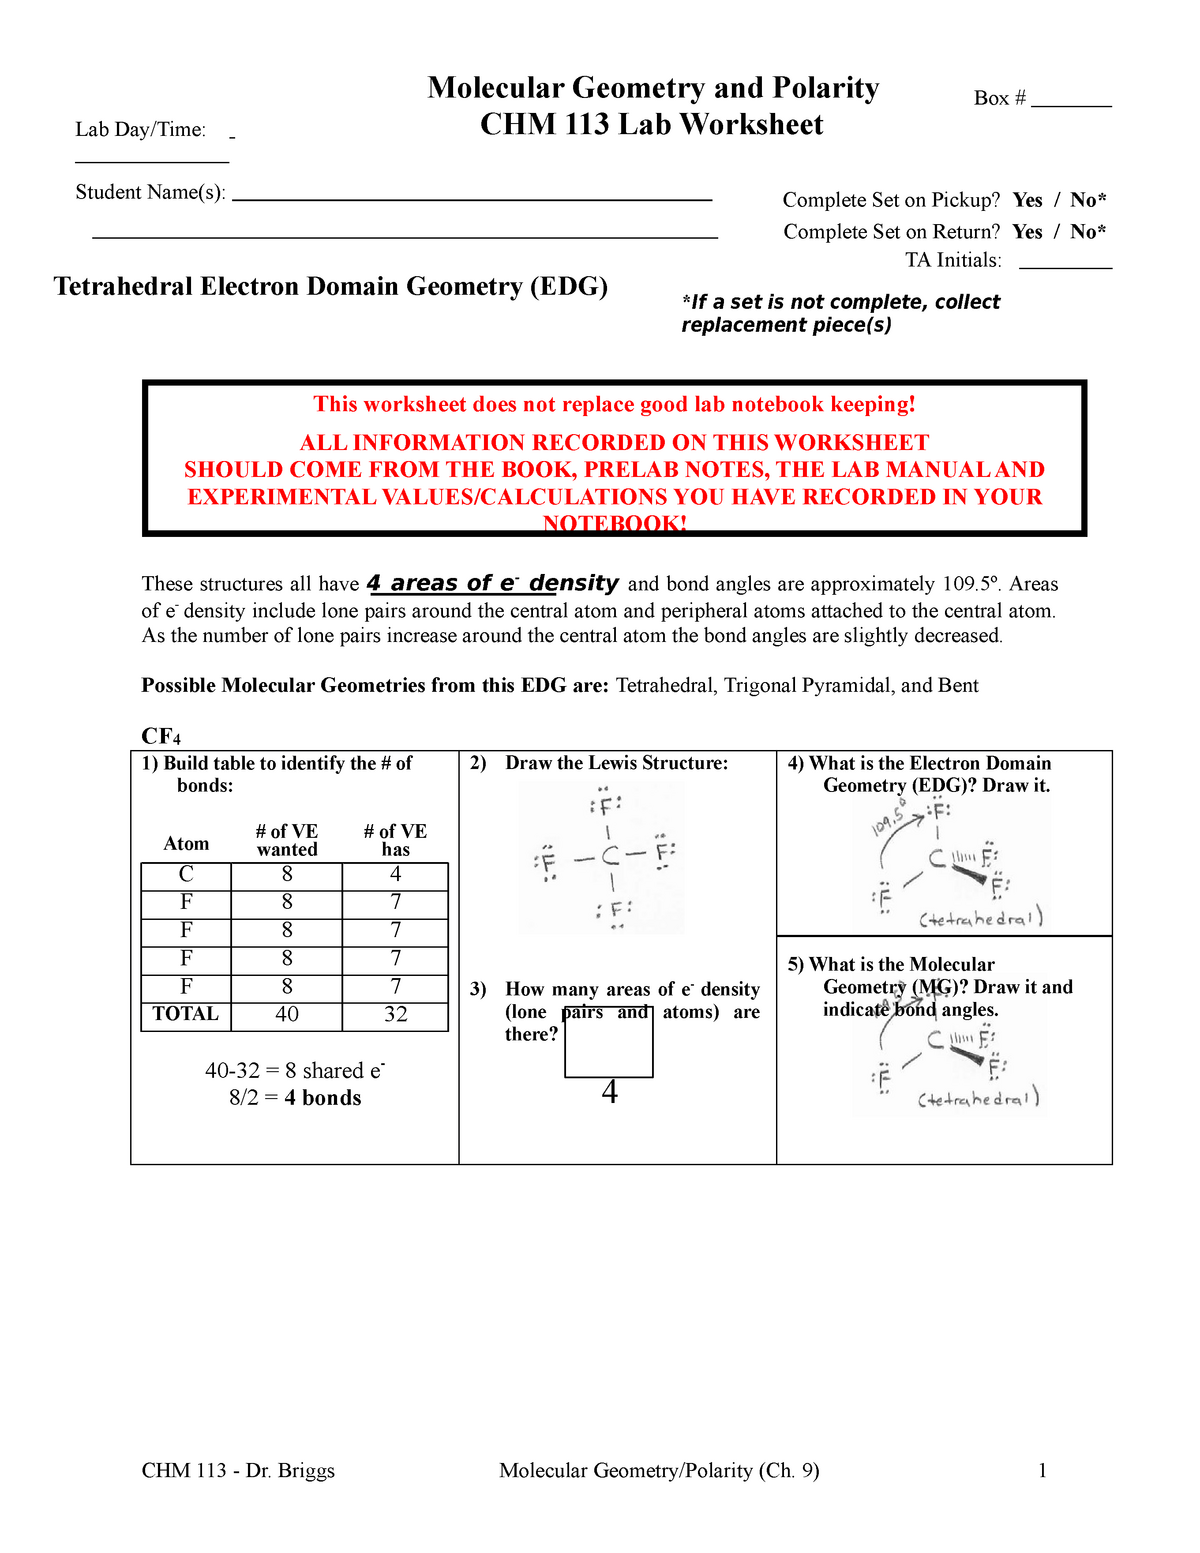 Molecular Geometry and Polarity WS-20 - CHM 20203 - Dr. Briggs Intended For Worksheet Polarity Of Bonds Answers